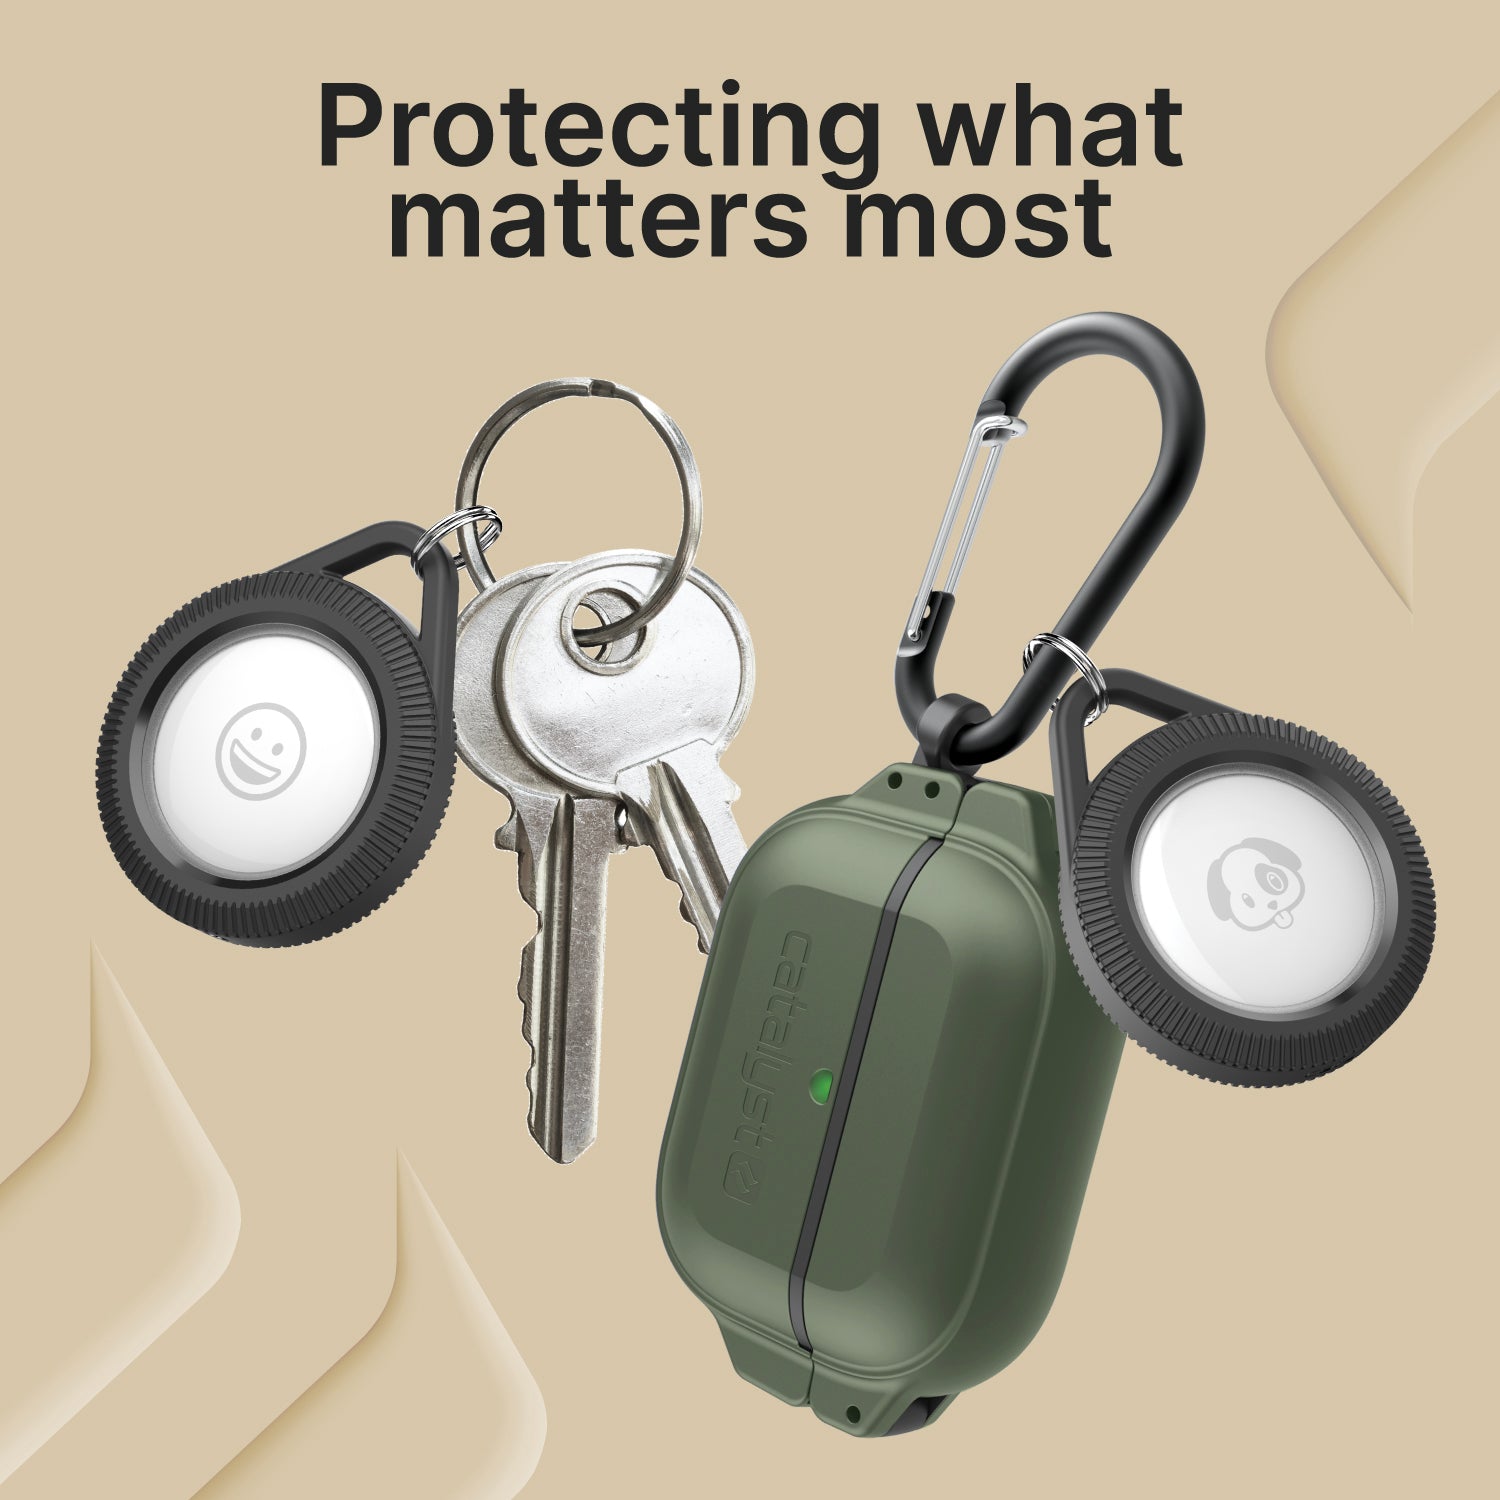 Catalyst airtag total protection case hang it attach on the keys and airpod case text read protecting what matters most